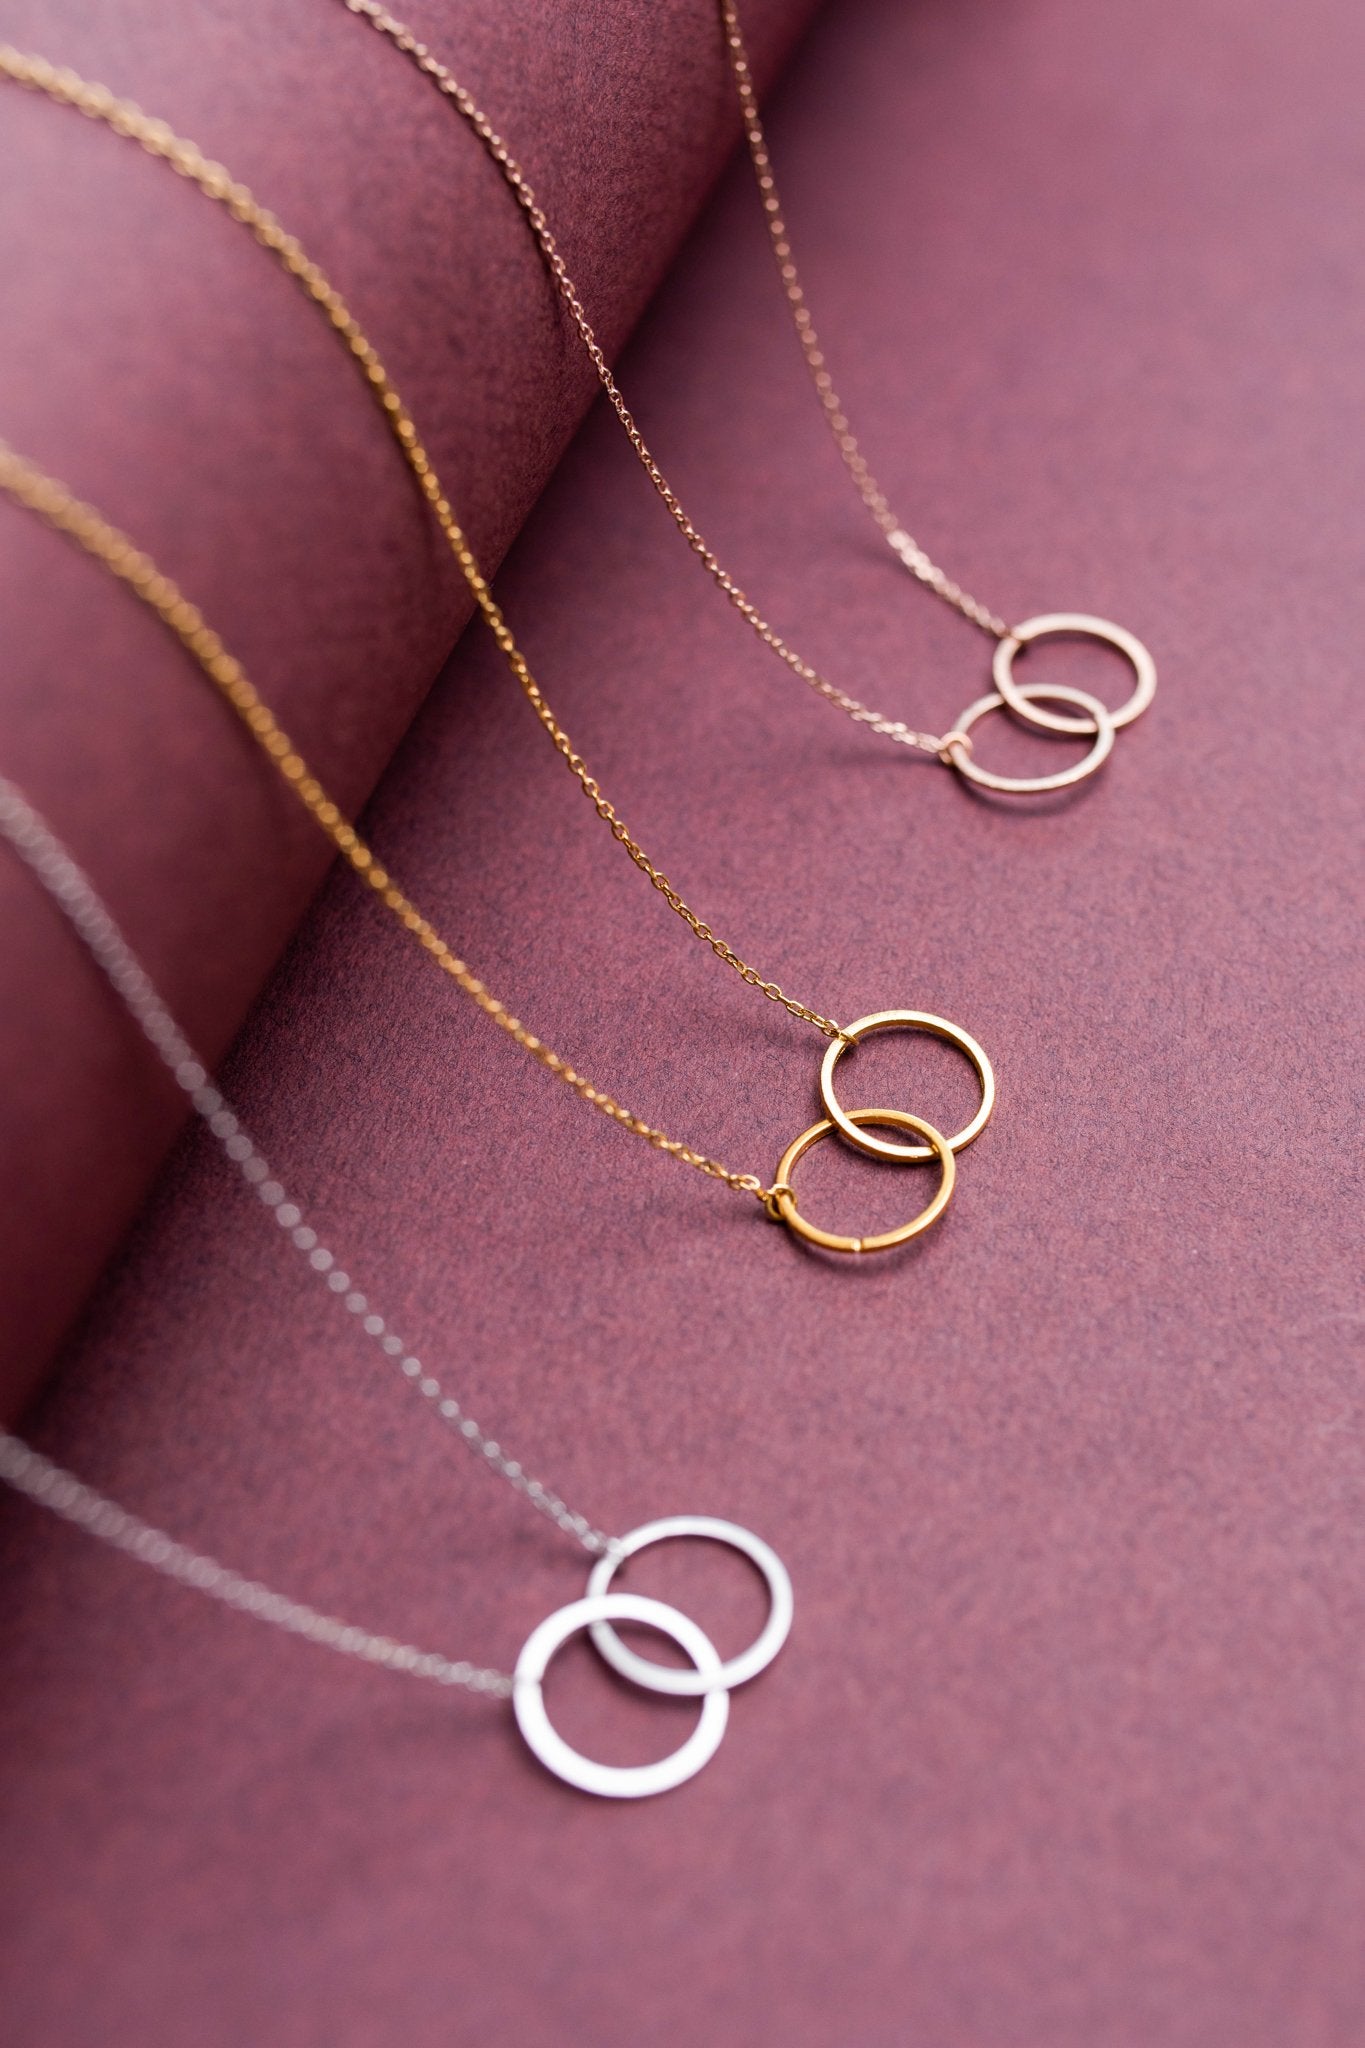 Hoops and Links Necklace